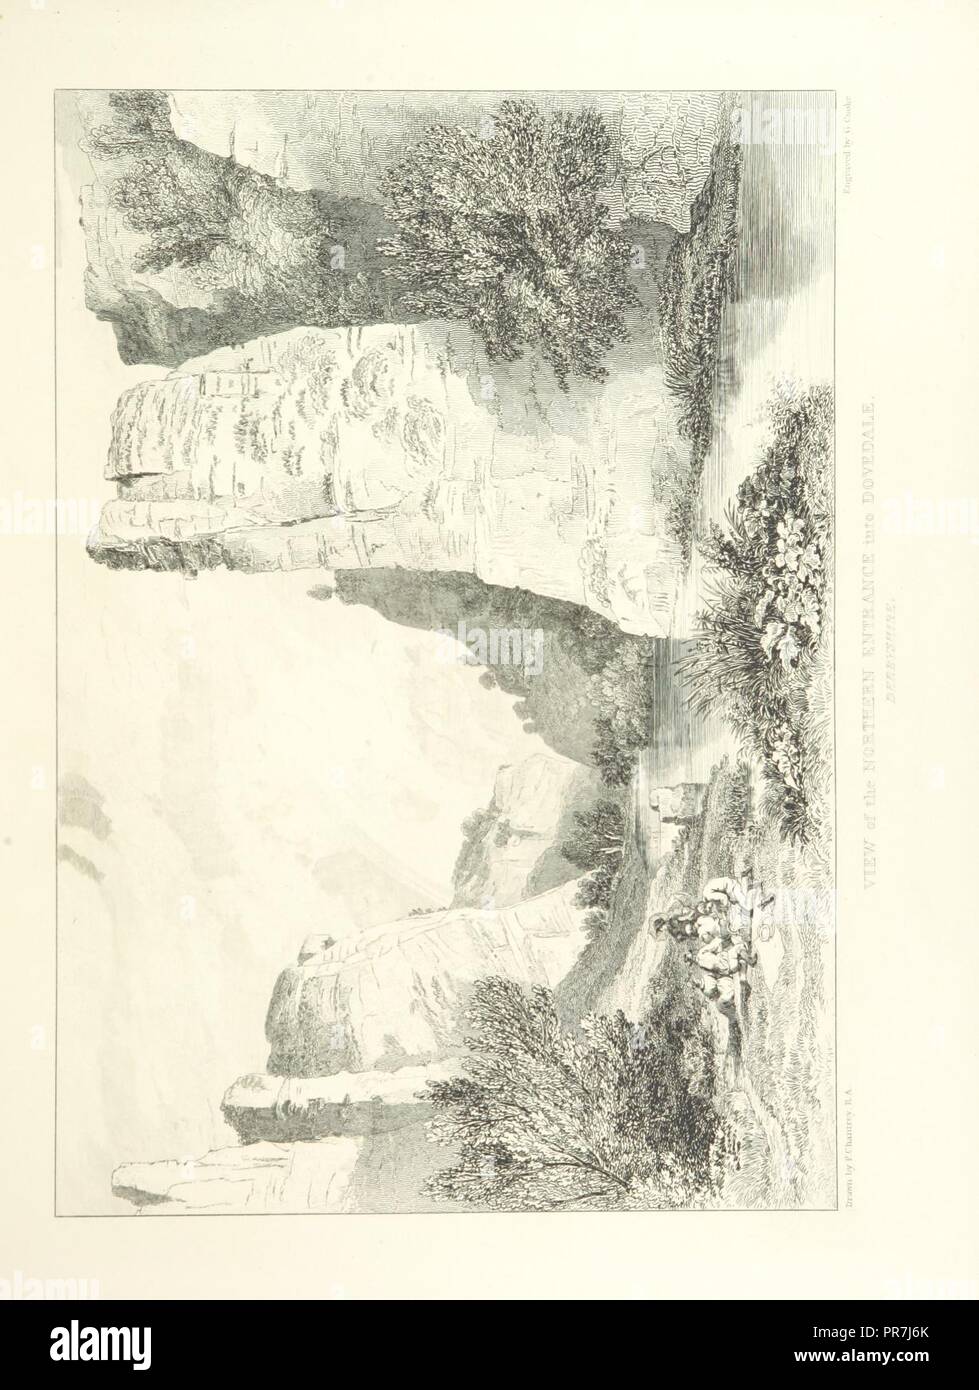 page 177 of 'Chantrey's Peak Scenery or Views in Derbyshire. Engraved by W. B. and George Cooke after drawings by Sir F. L. Chantrey, R. A. With historical and topographical descriptions by James Croston' by The B0013. Stock Photo